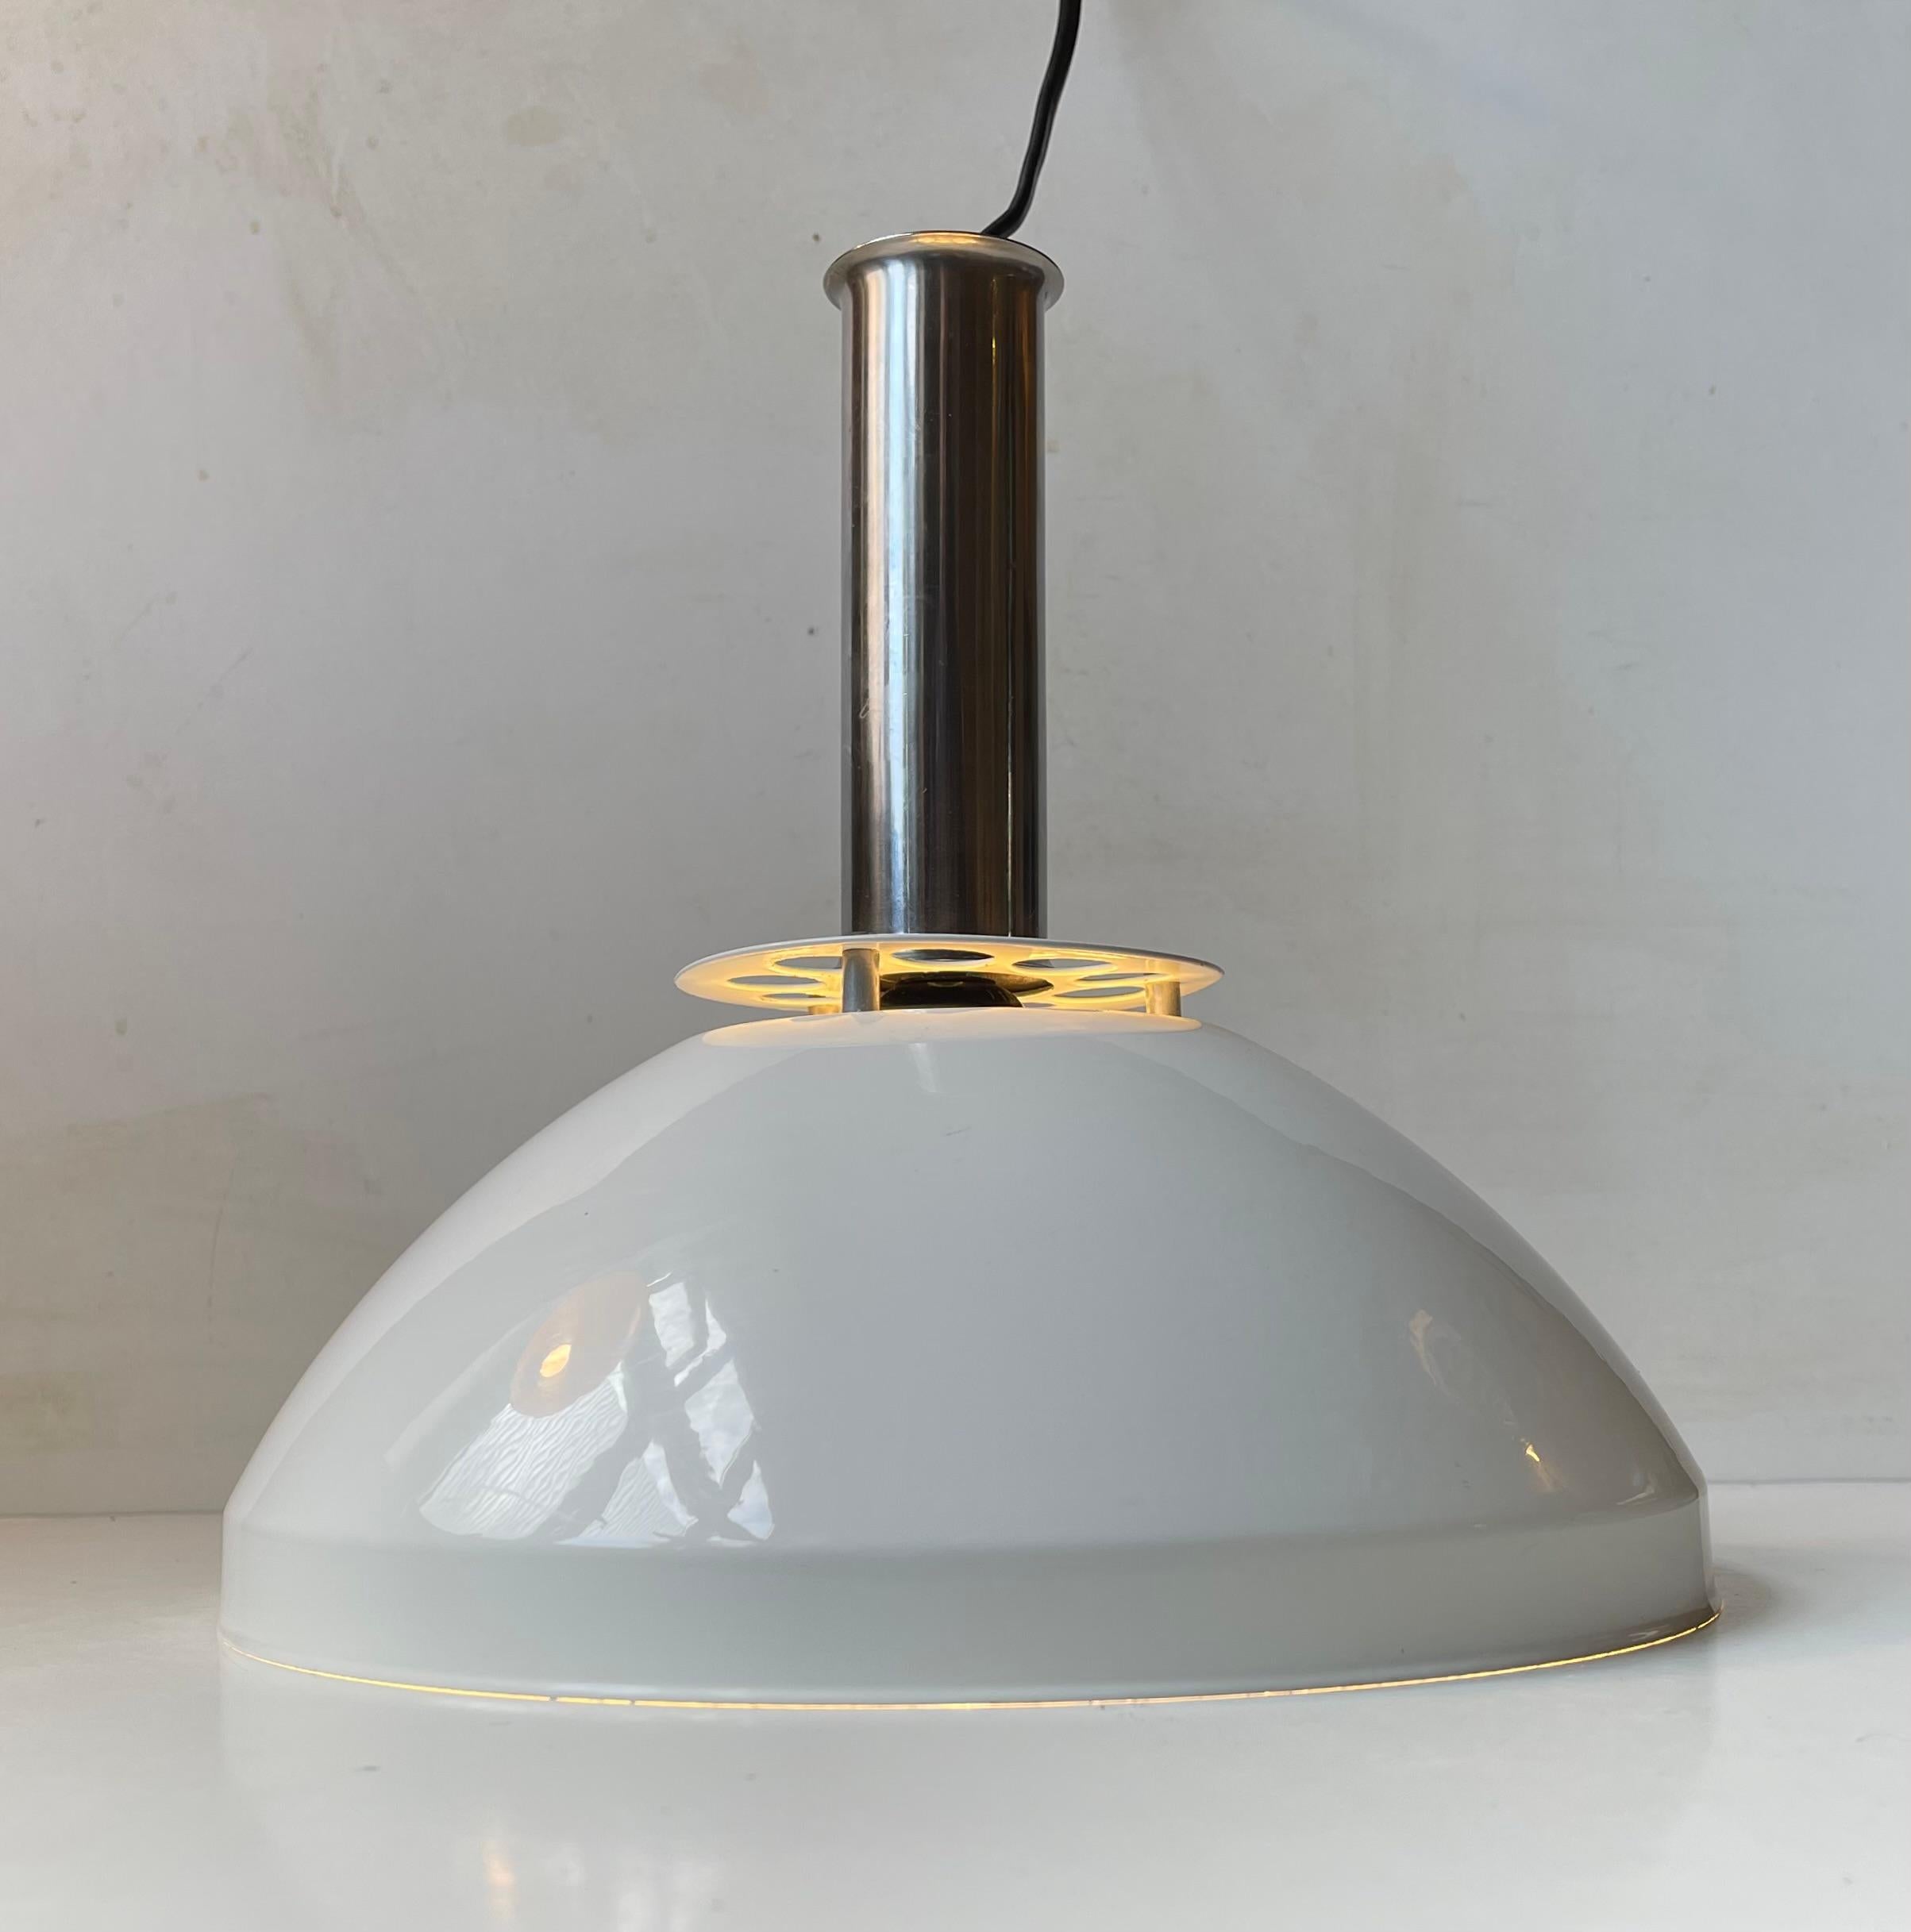 Metal Italian Industrial Ceiling Lamp in White Enamel and Chrome Plating, 1970s For Sale